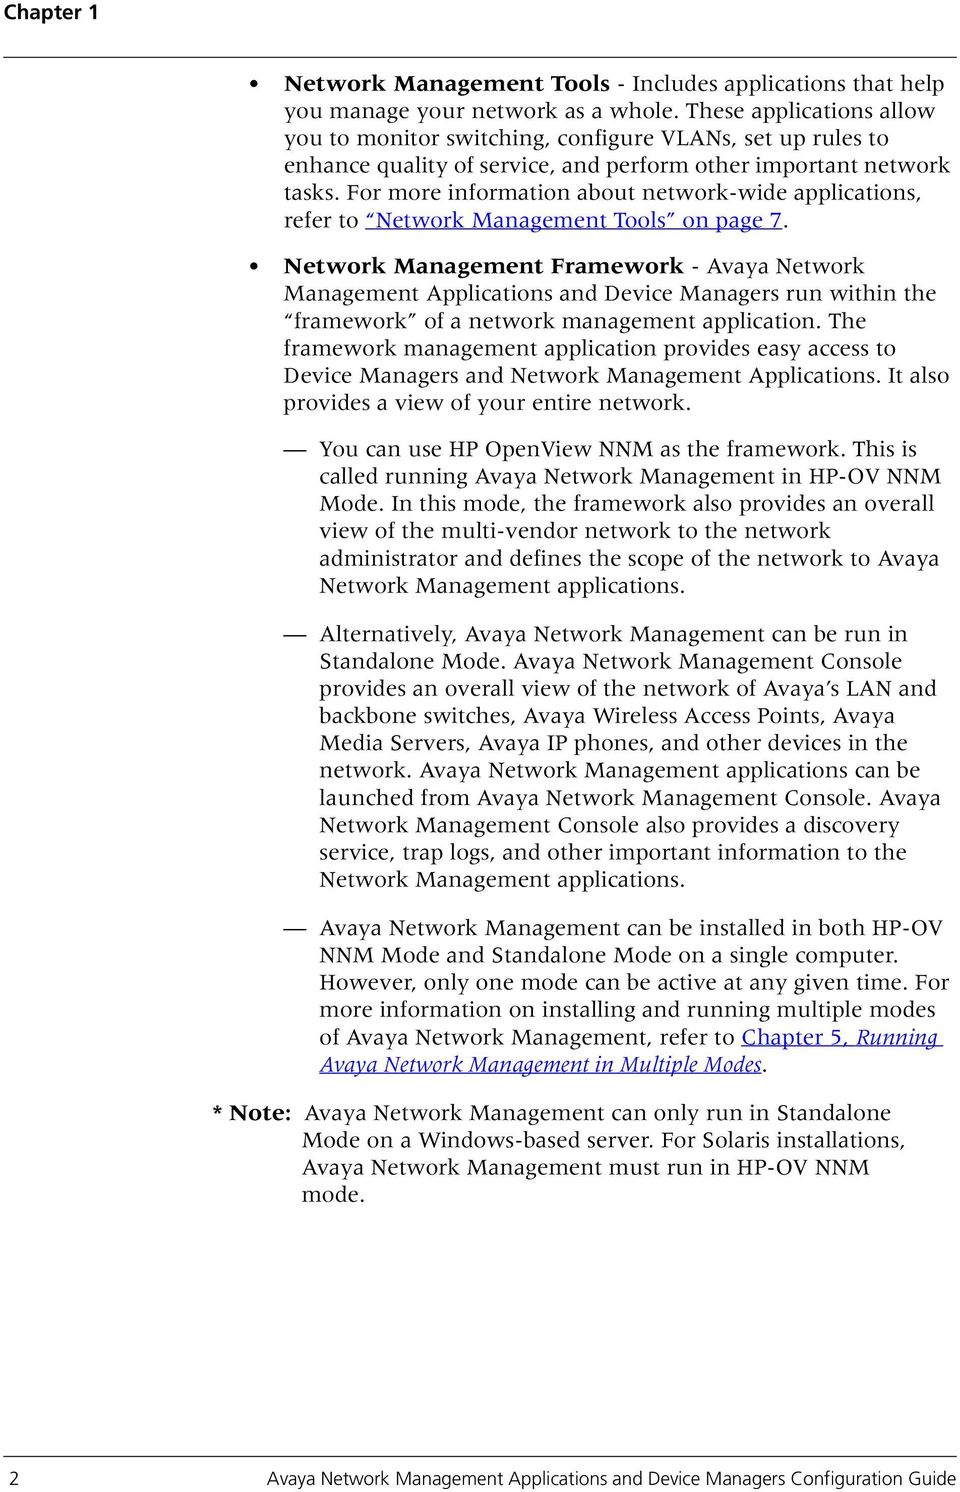 For more information about network-wide applications, refer to Network Management Tools on page 7.